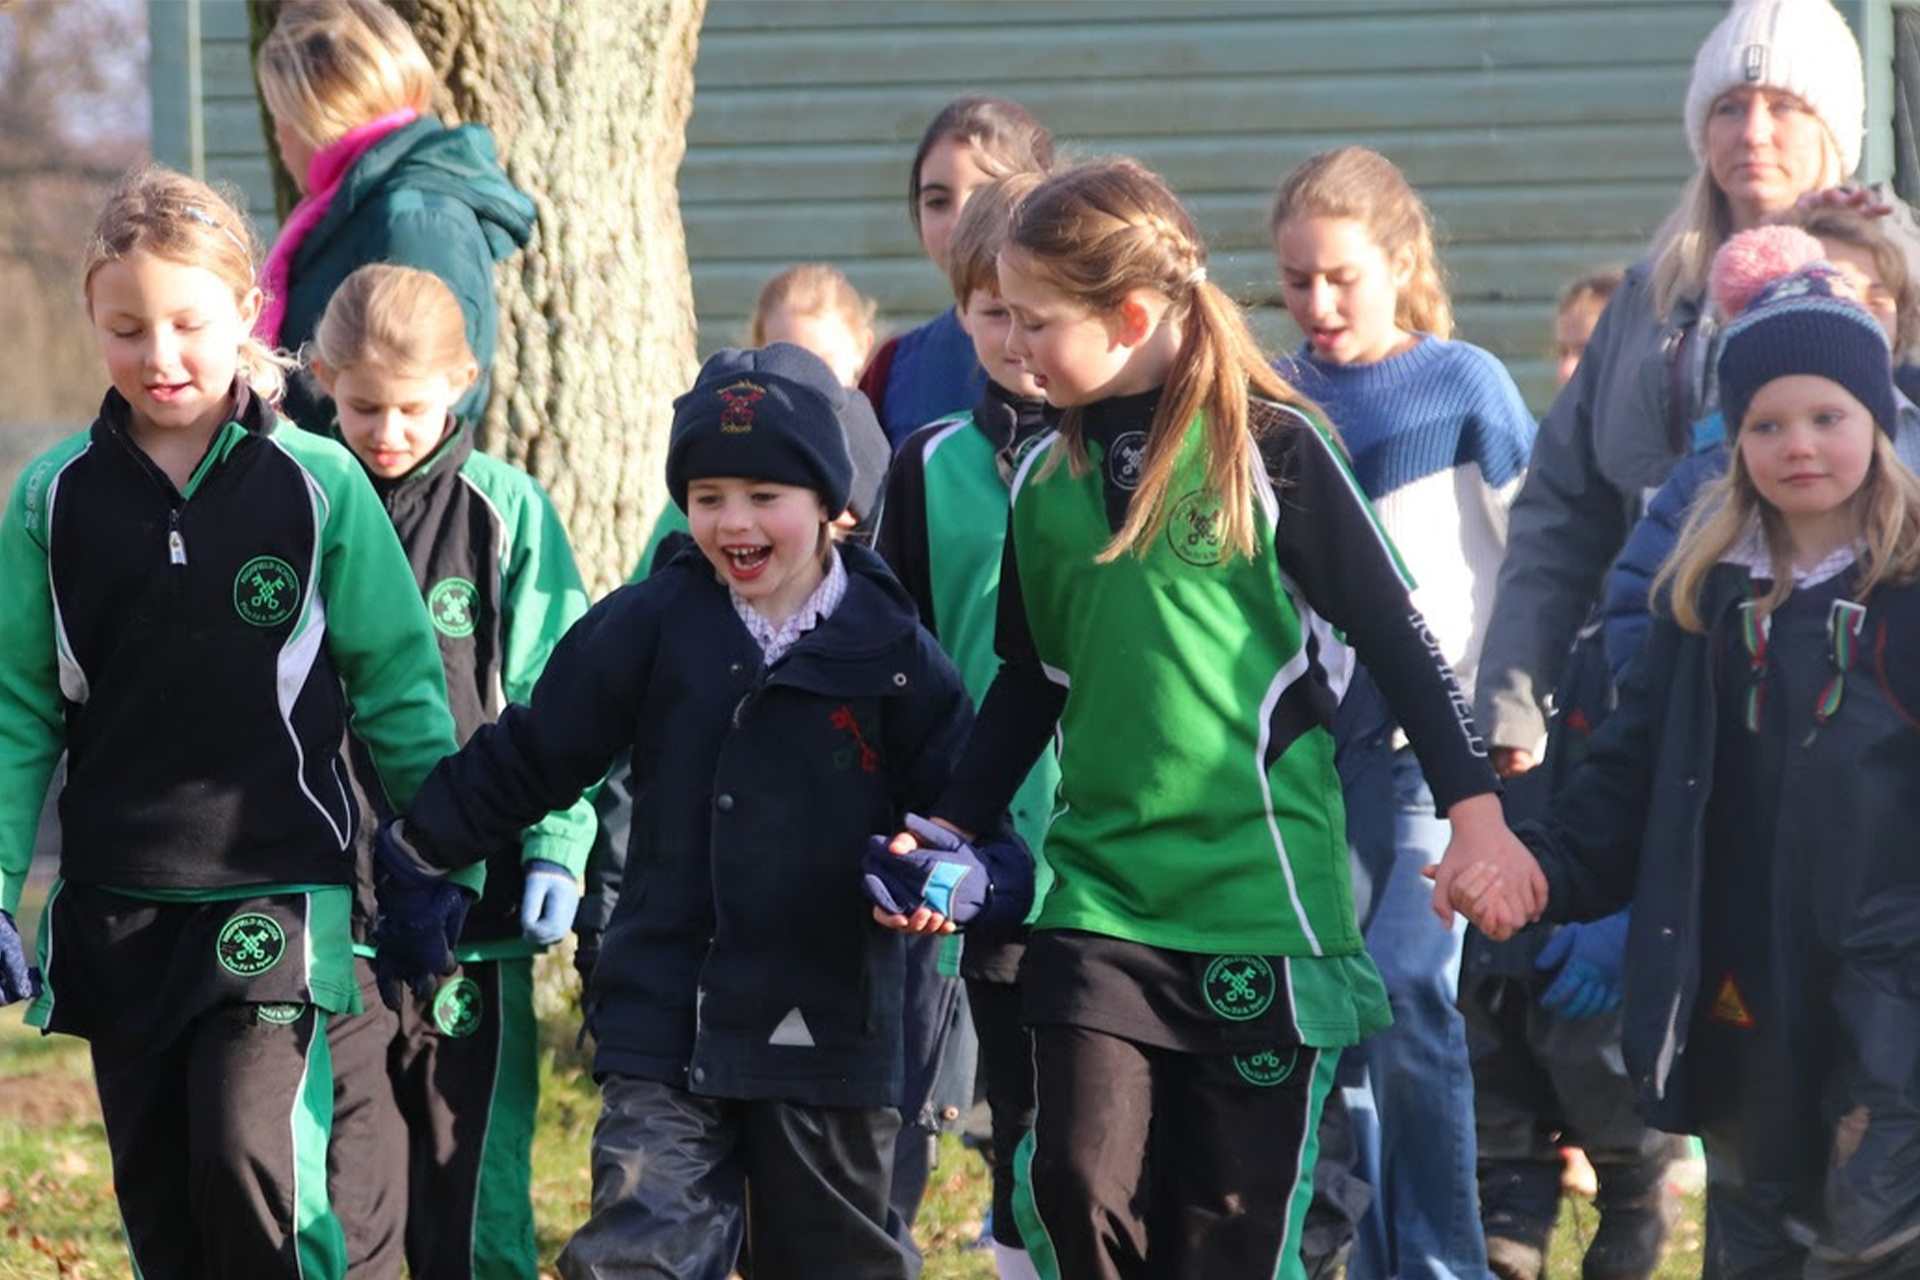 Highfield and Brookham pupils having fun together outdoors